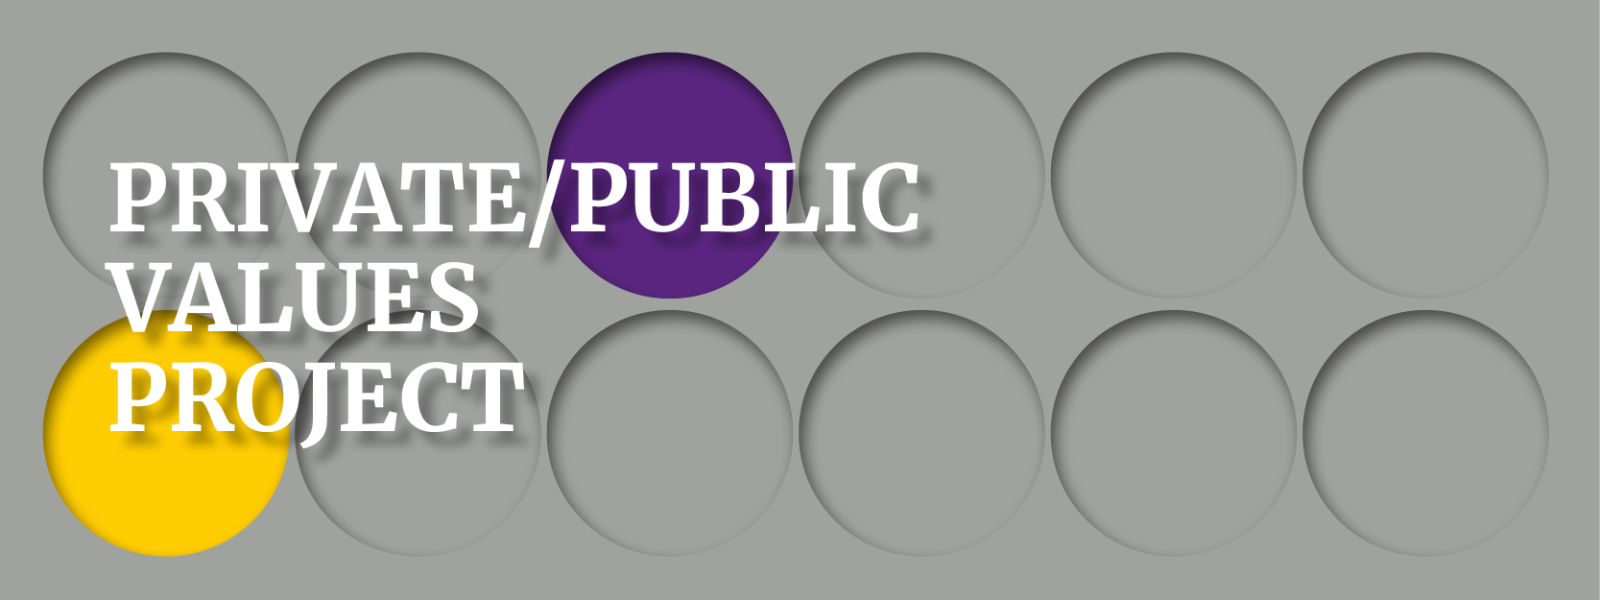 grey graphic header with grey circles, one yellow circle, one purple circle and text overlay 'PRIVATE/PUBLIC VALUES PROJECT'